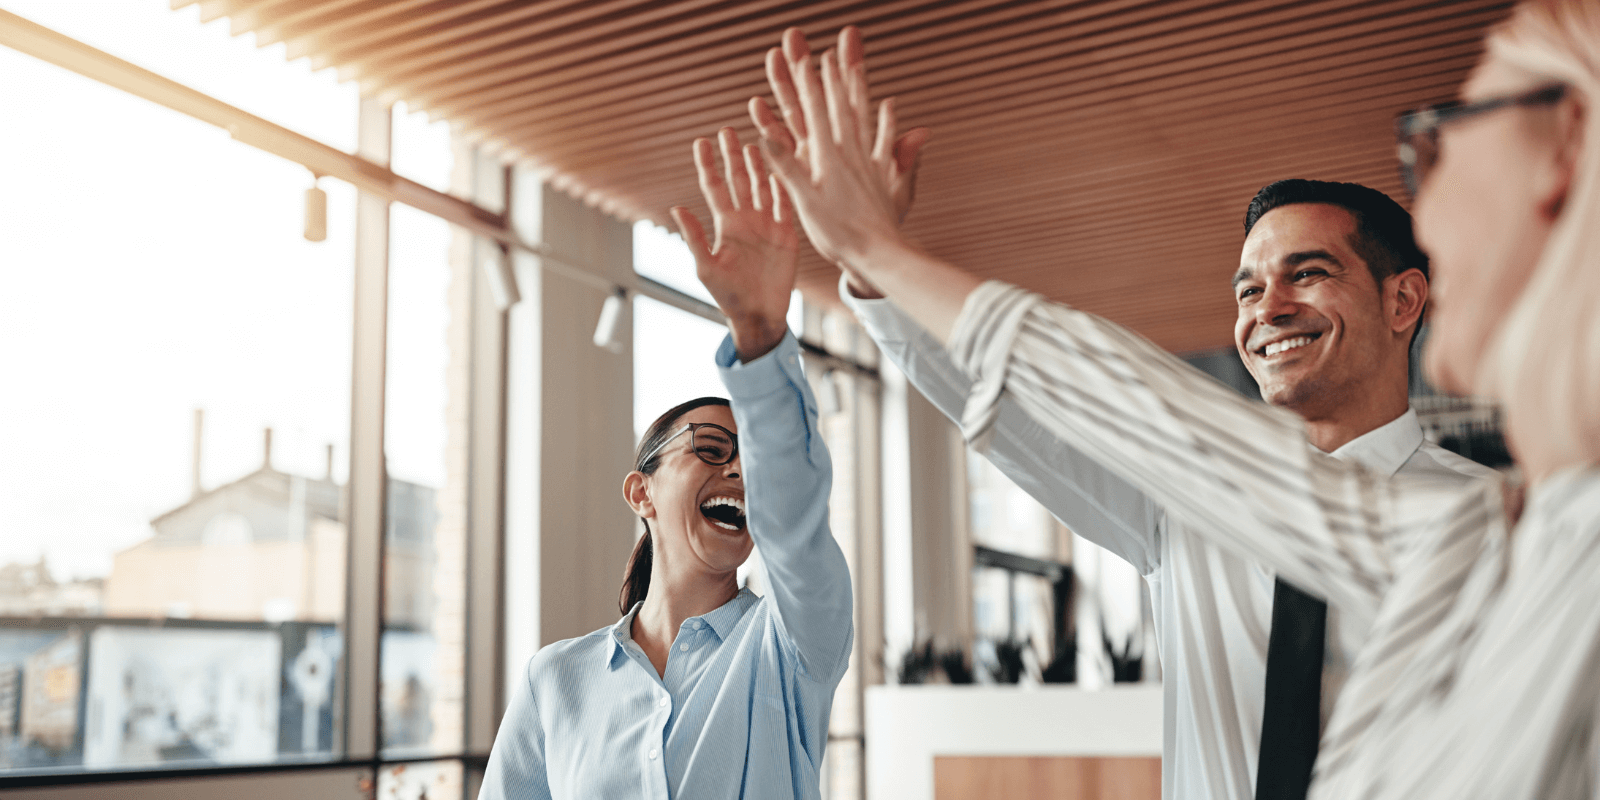 Boost confidence and connections by Celebrating Success the Right Way